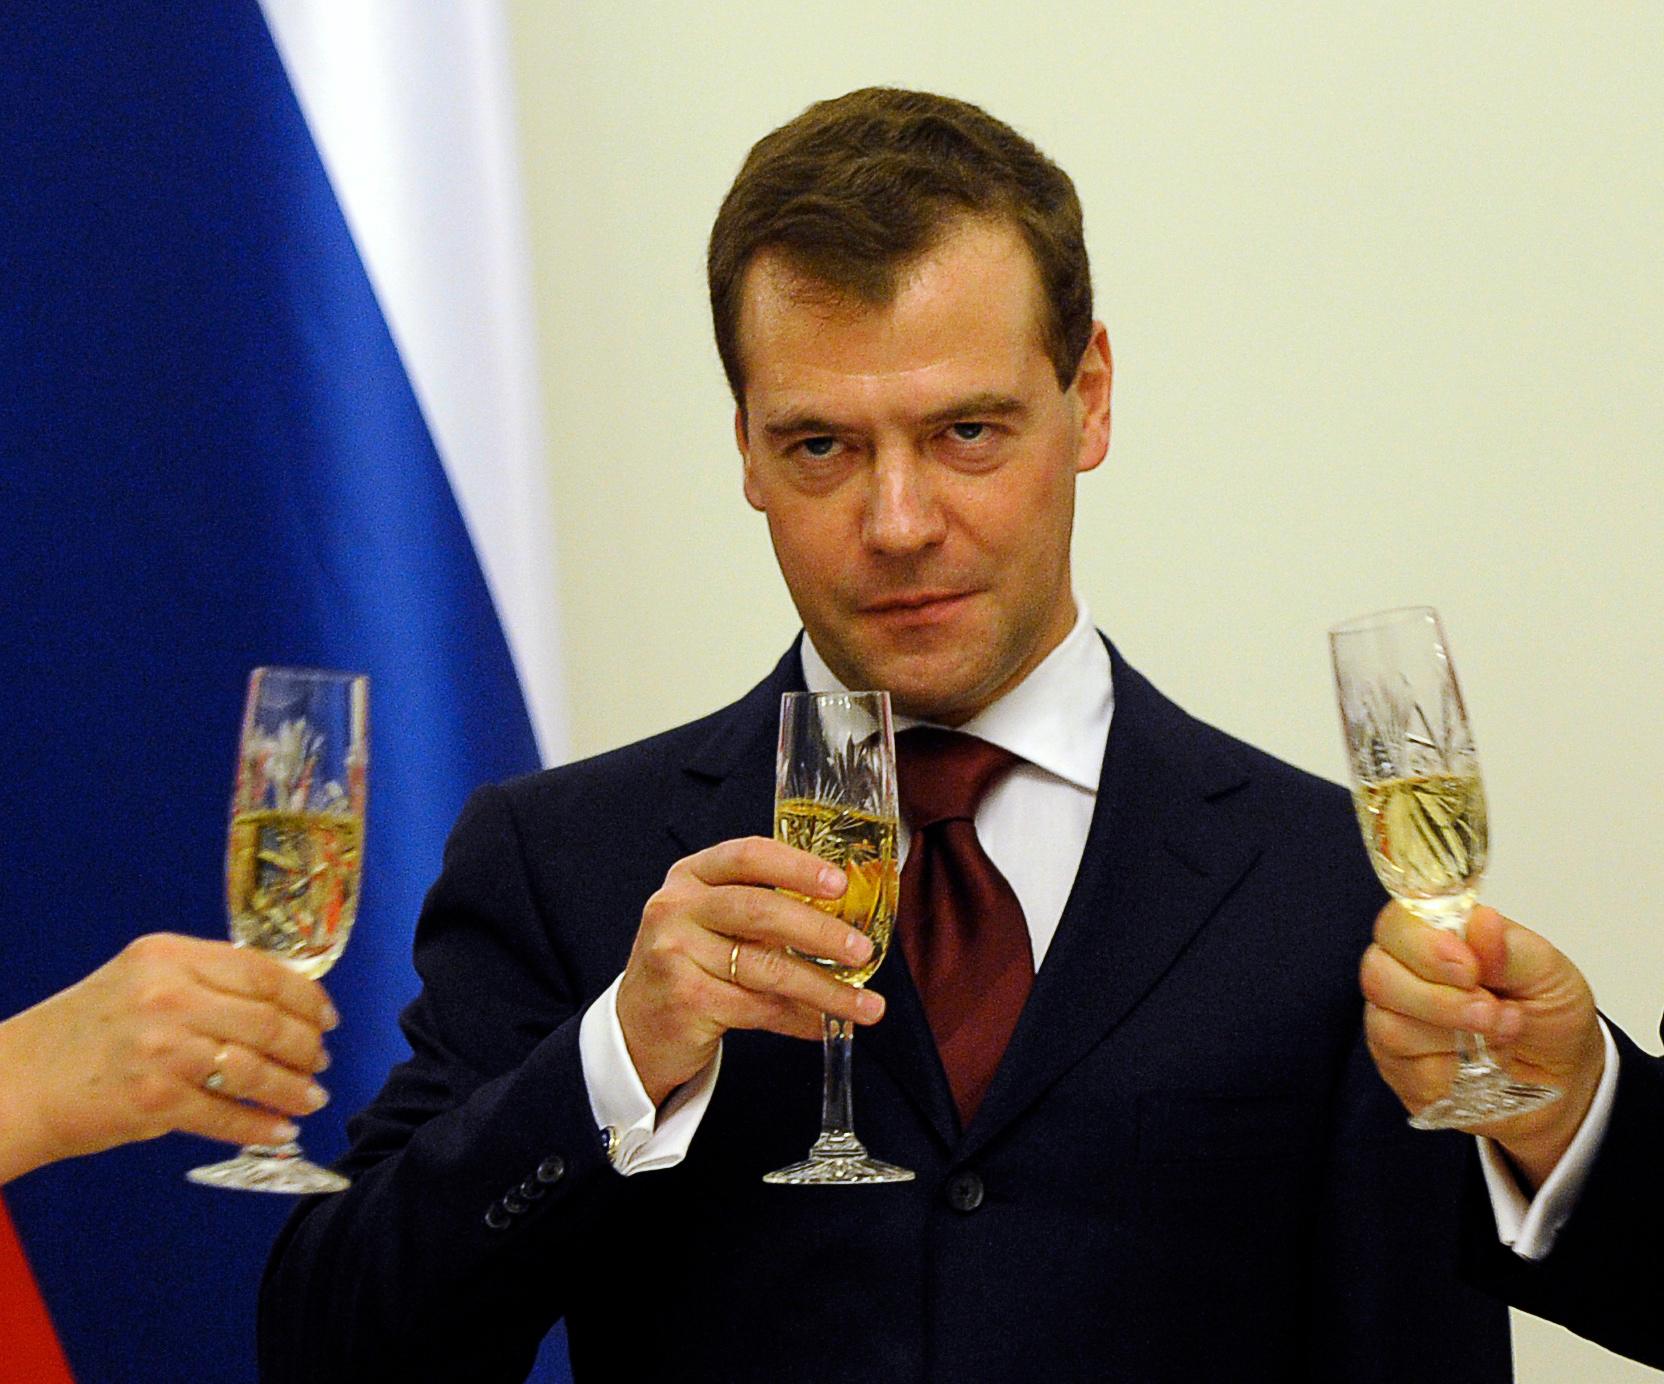 Then-President Dmitry Medvedev of Russia toasts with champagne during a state dinner in Warsaw in 2010.